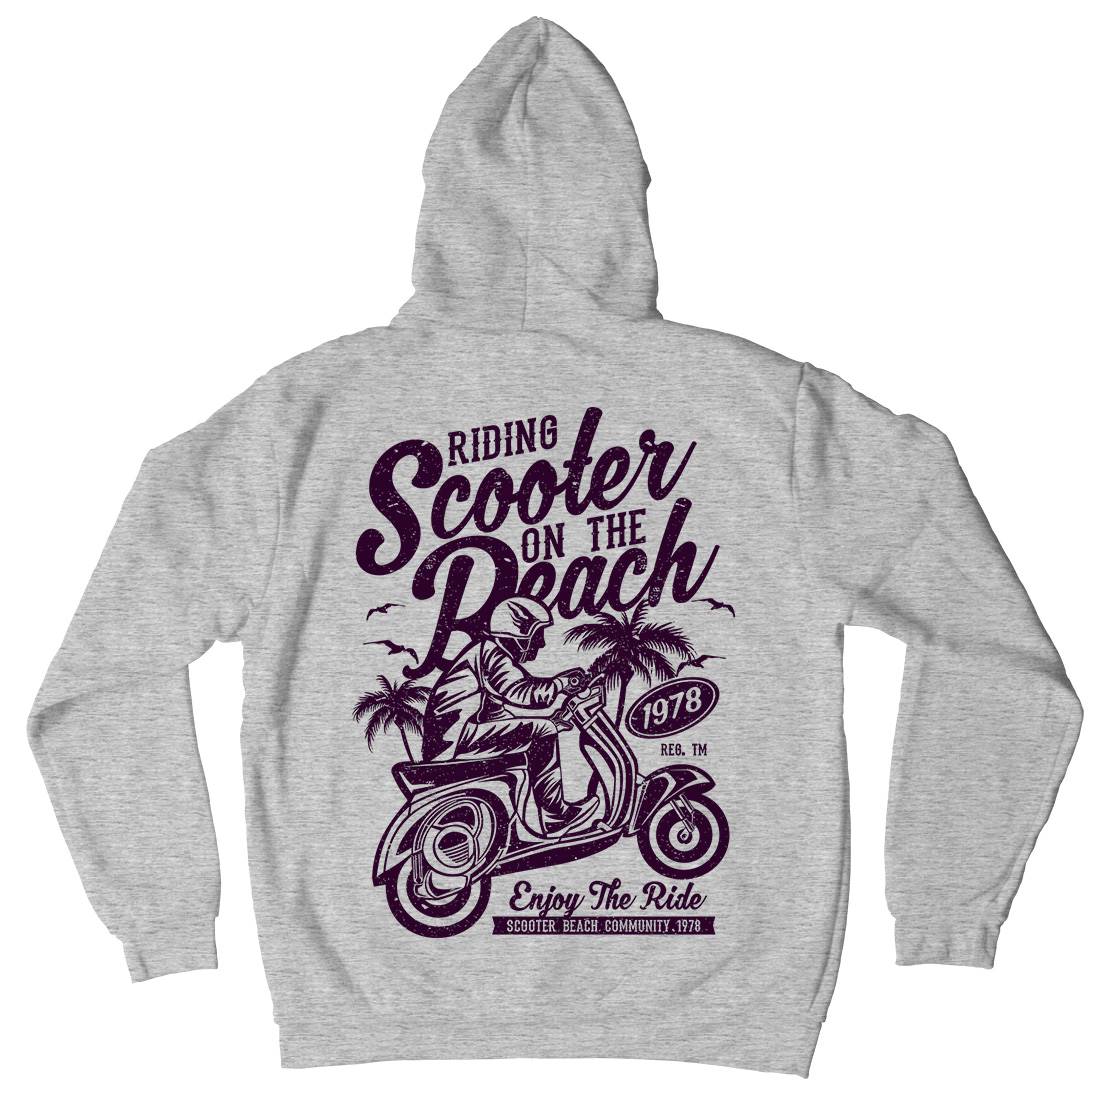 Scooter Beach Mens Hoodie With Pocket Motorcycles A134